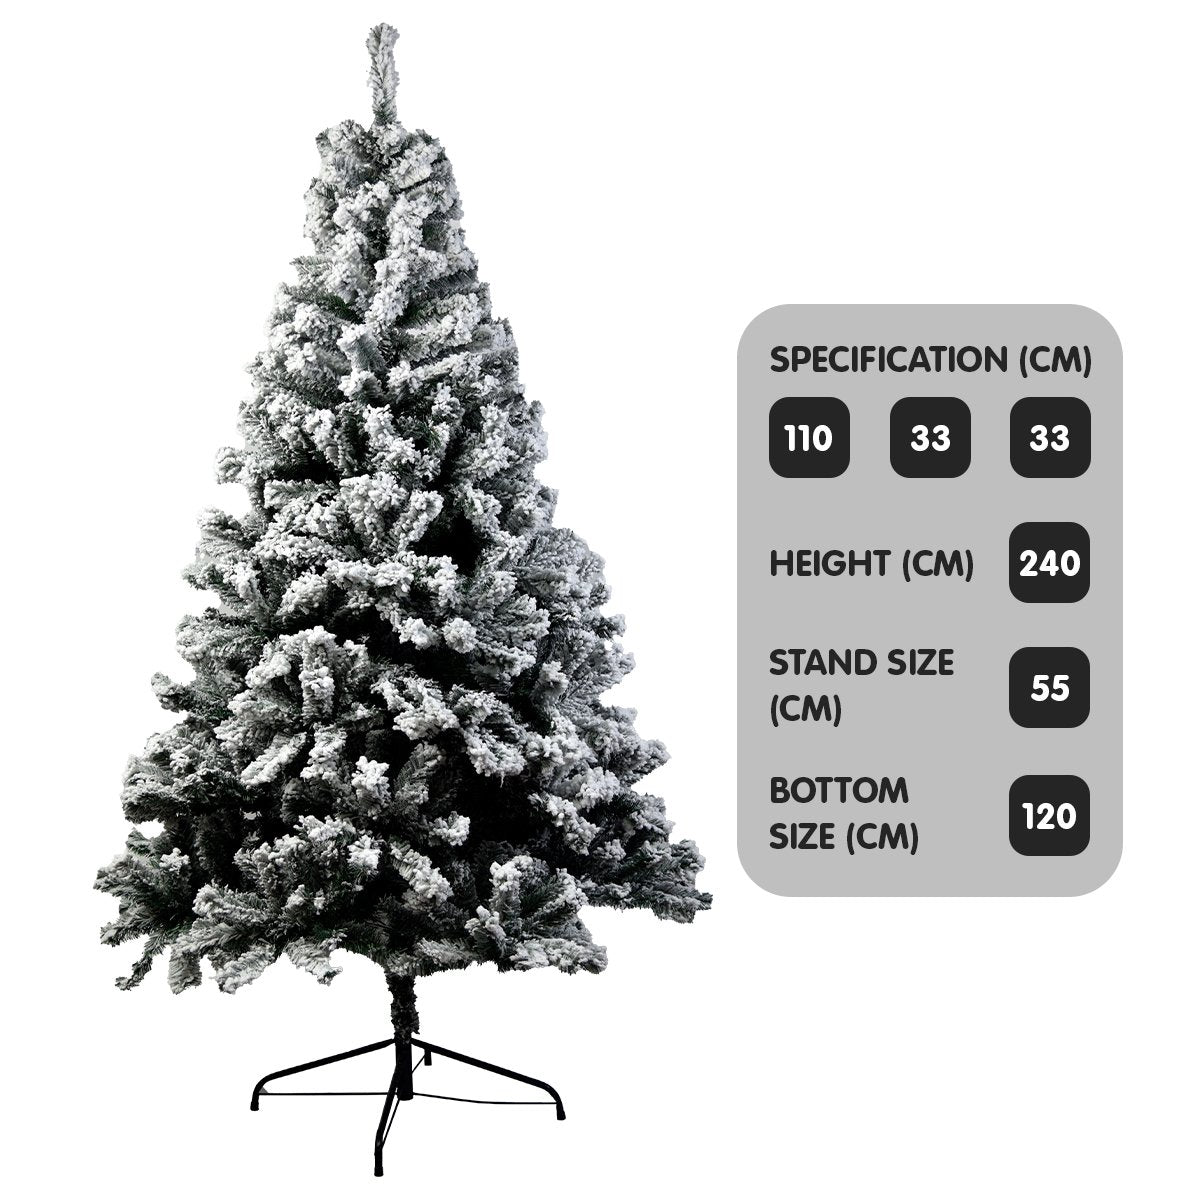 Christabelle Snow-Tipped Artificial Christmas Tree 2.4m 1500 Tips - SILBERSHELL